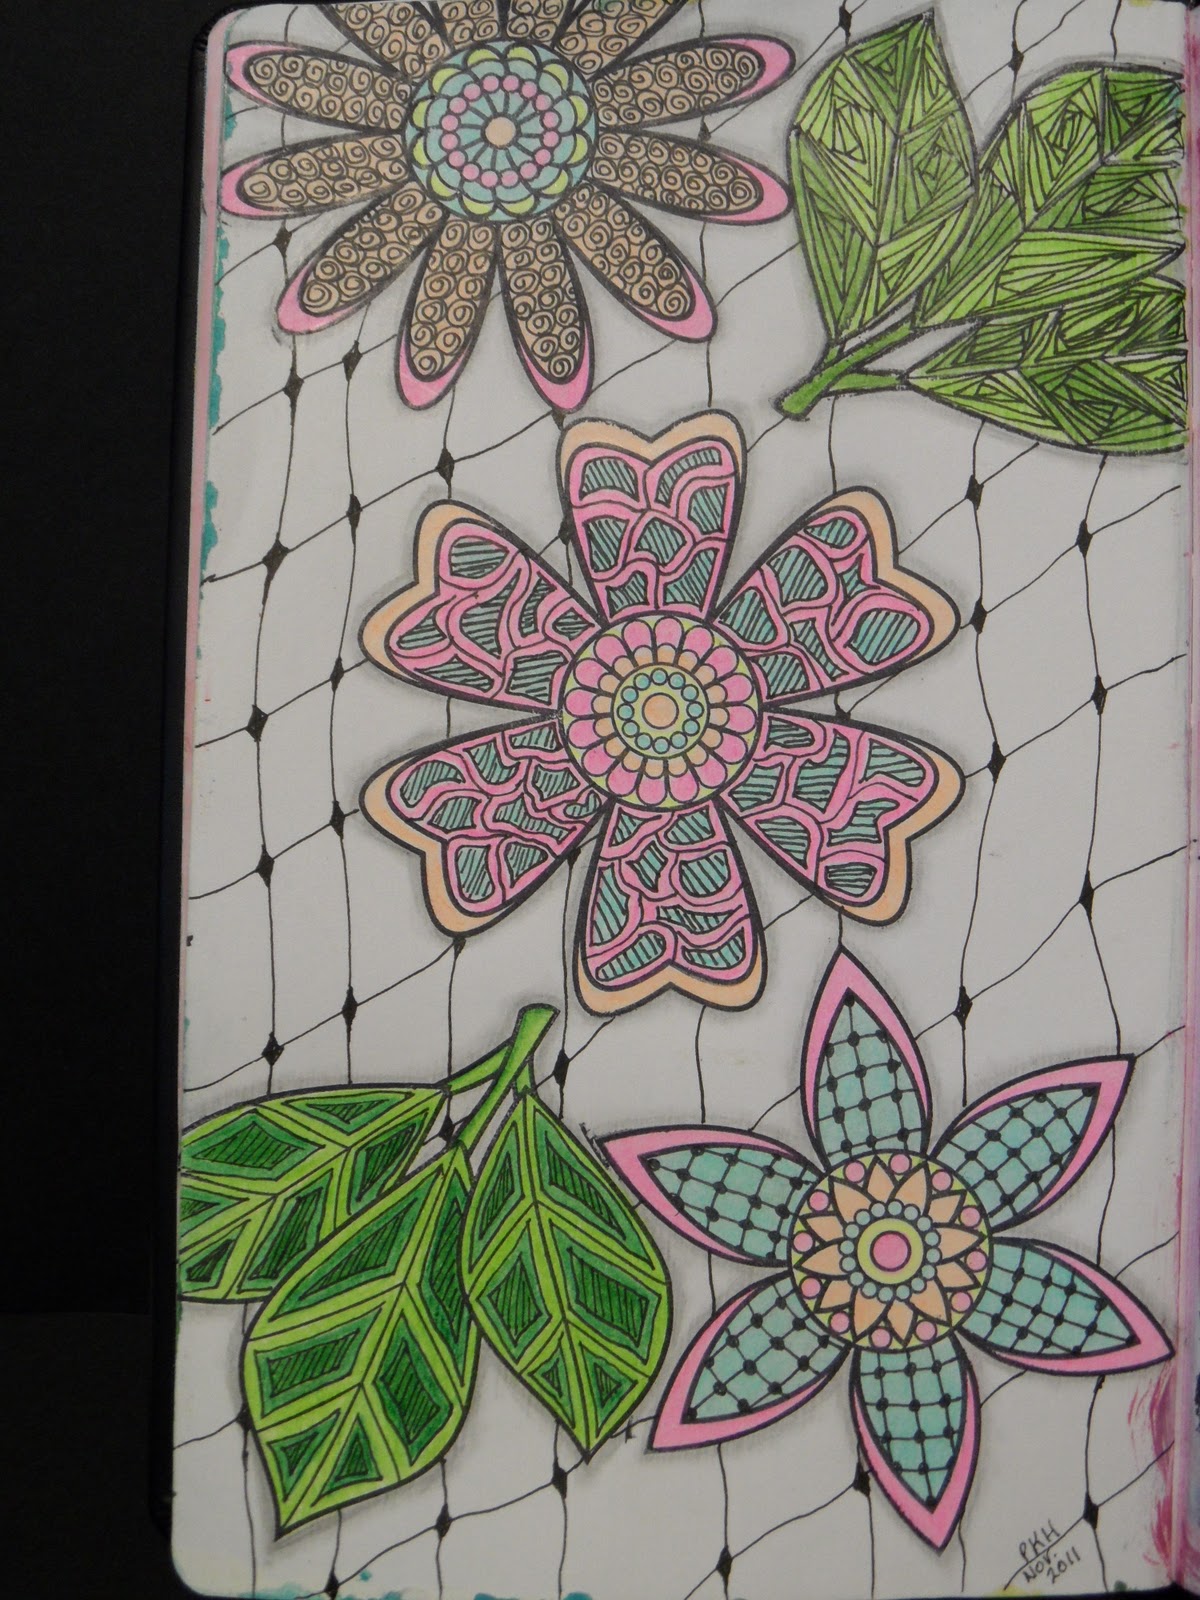 Trish's Artistic Adventures: Zentangle Inspired Art - with Outline stamps